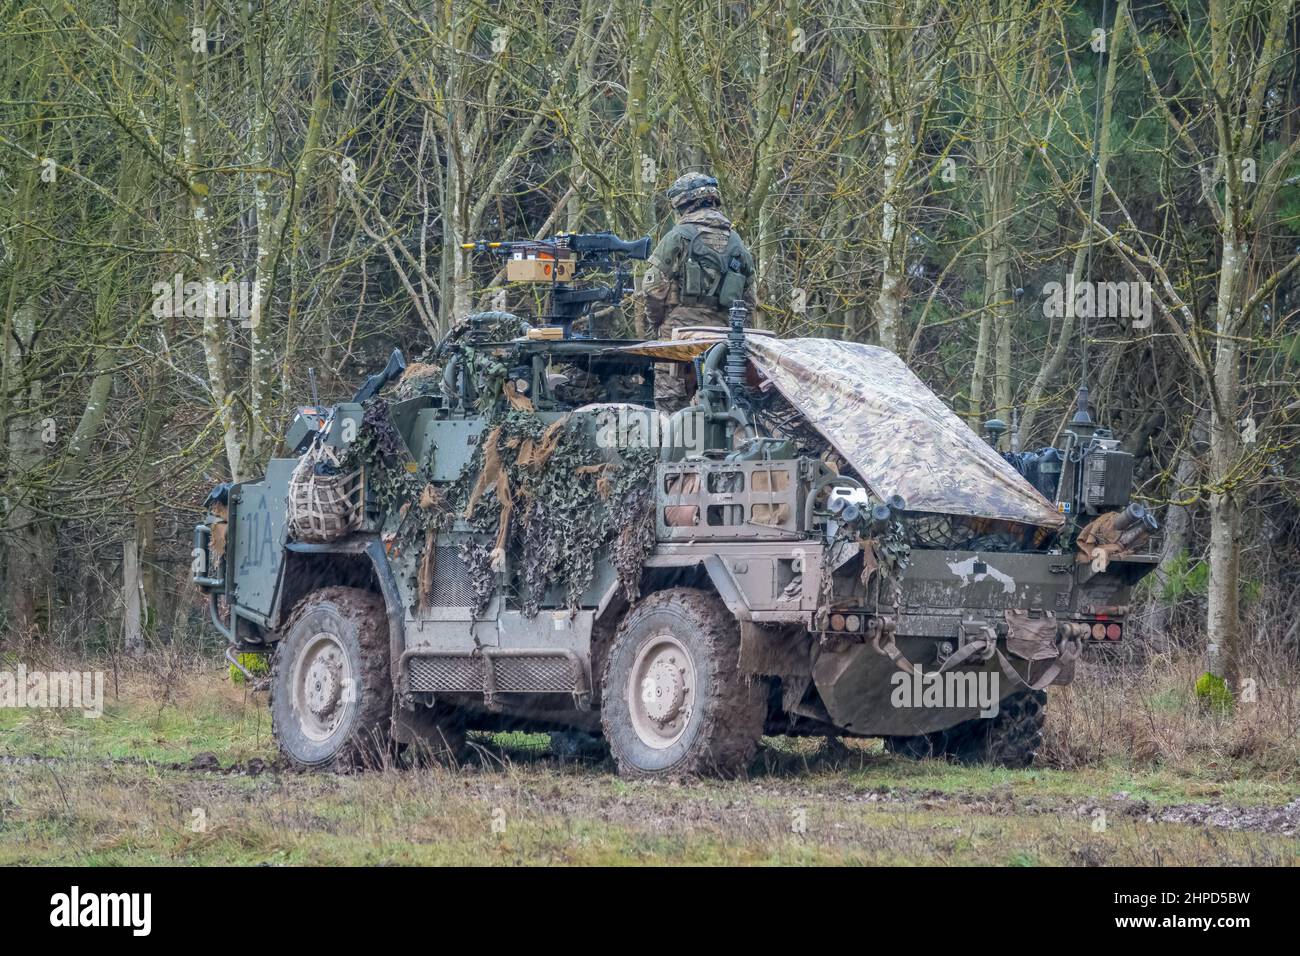 British army Supacat Jackal 4x4 rapid assault, fire support and reconnaissance vehicles on a military battle training exercise, Wiltshire UK Stock Photo